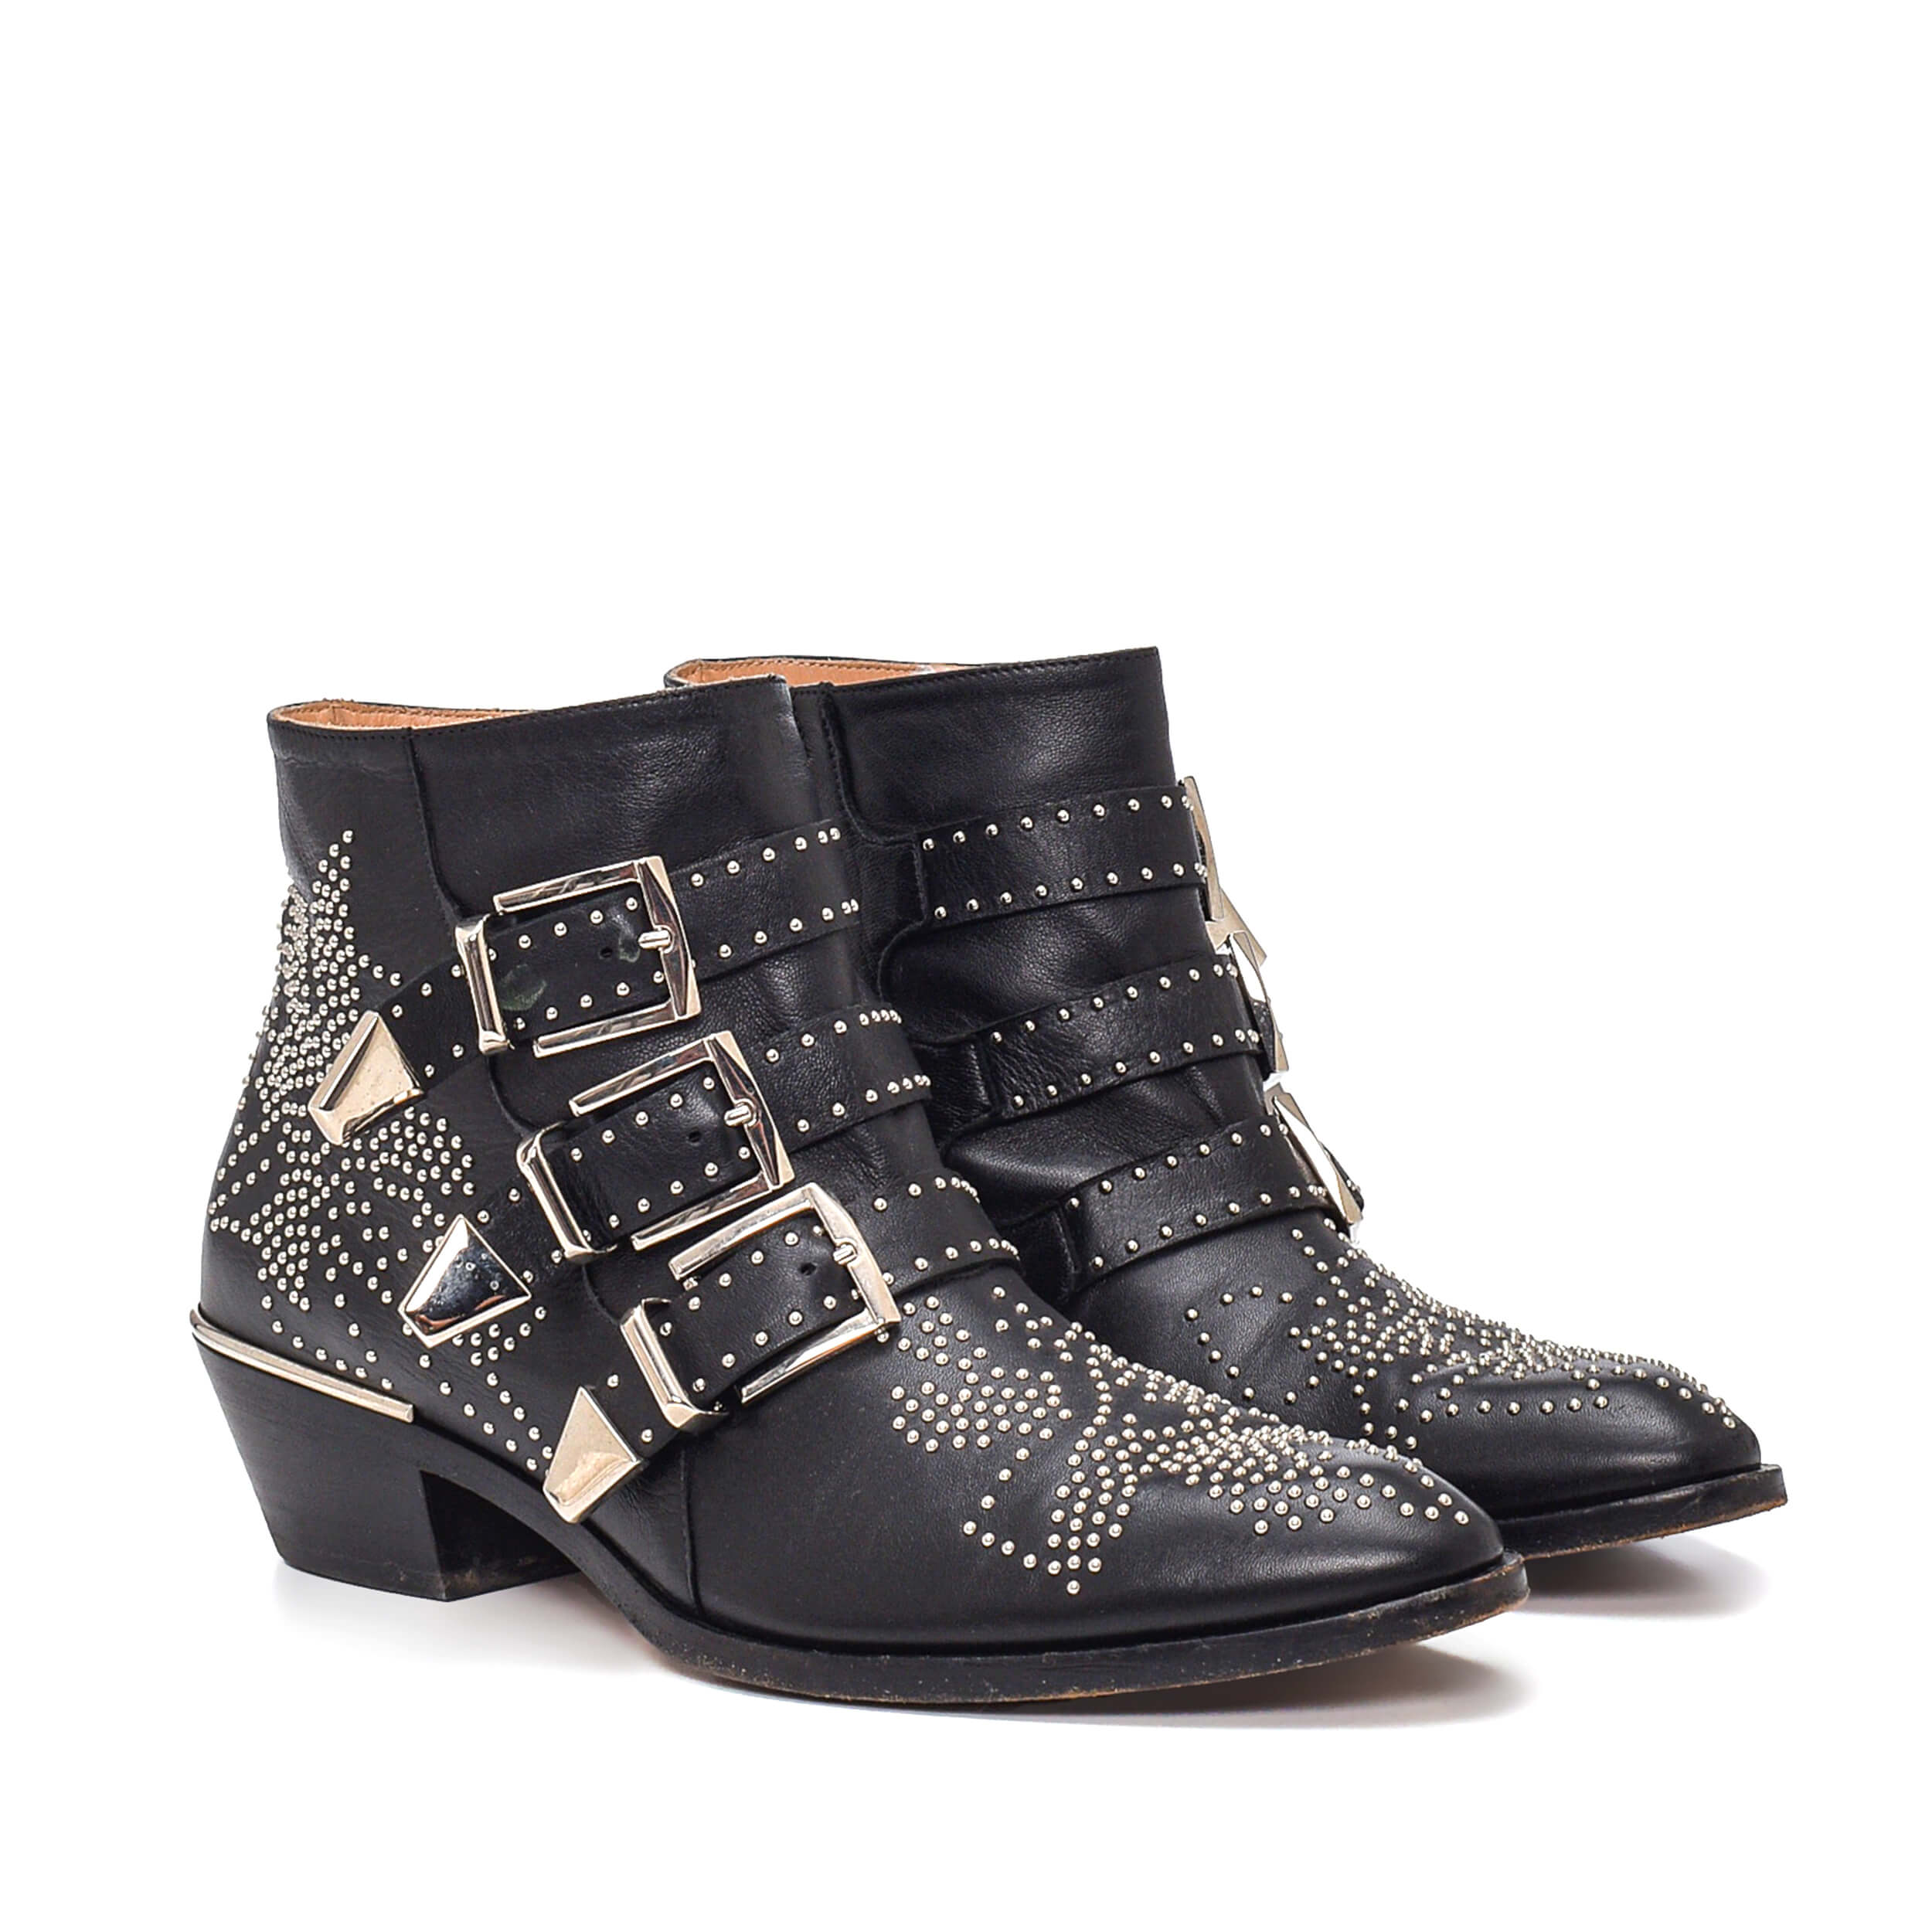 Chloe - Black Smooth Nappa Leather Strapped & Studded Susanna Boots III